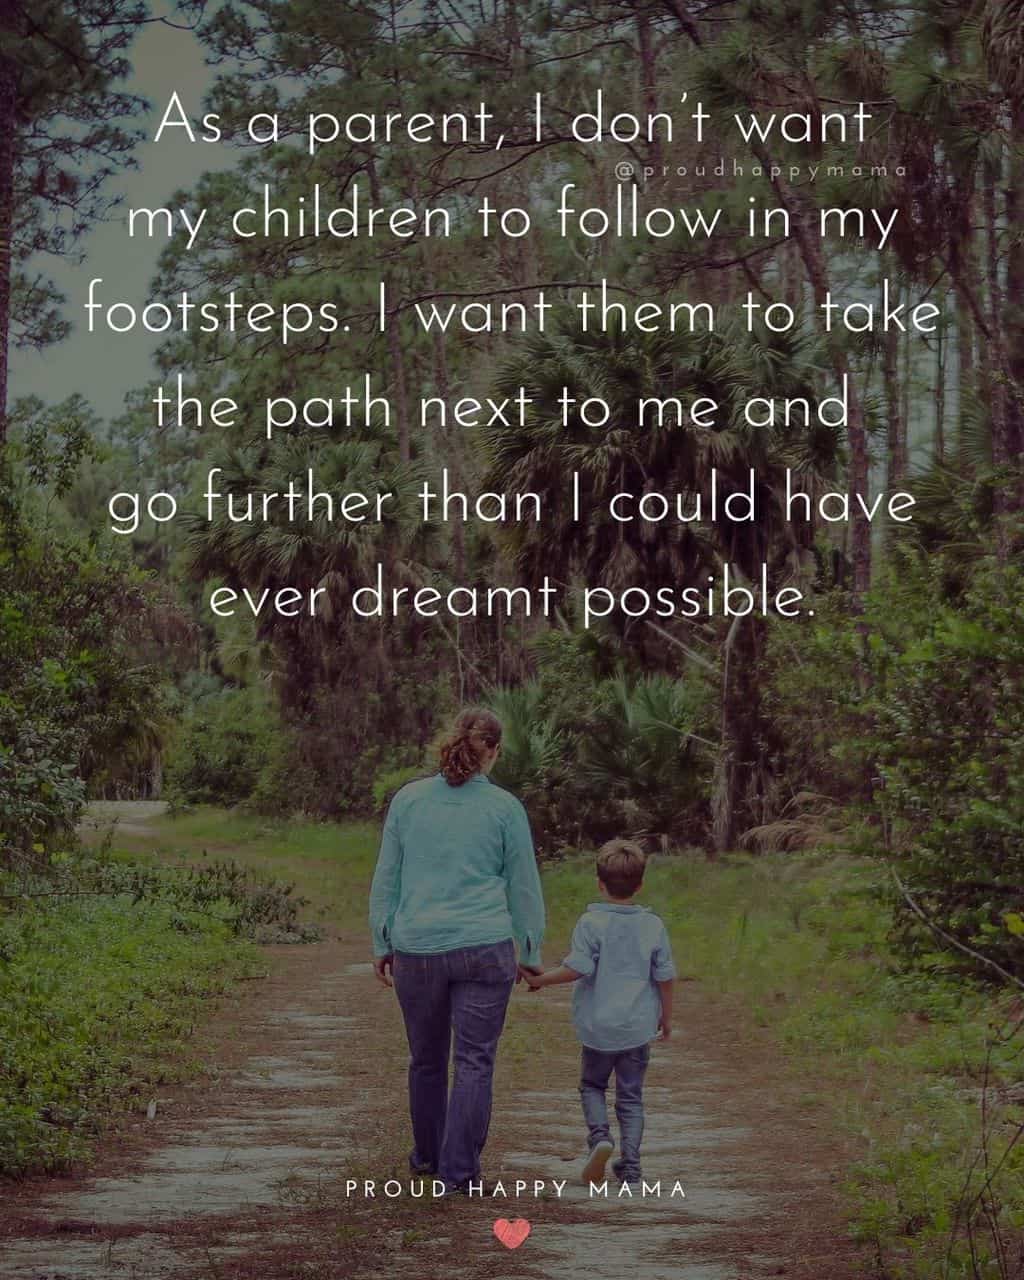 Parenting Quotes - As a parent, I don’t want my children to follow in my footsteps. I want them to take the path next to me and go further